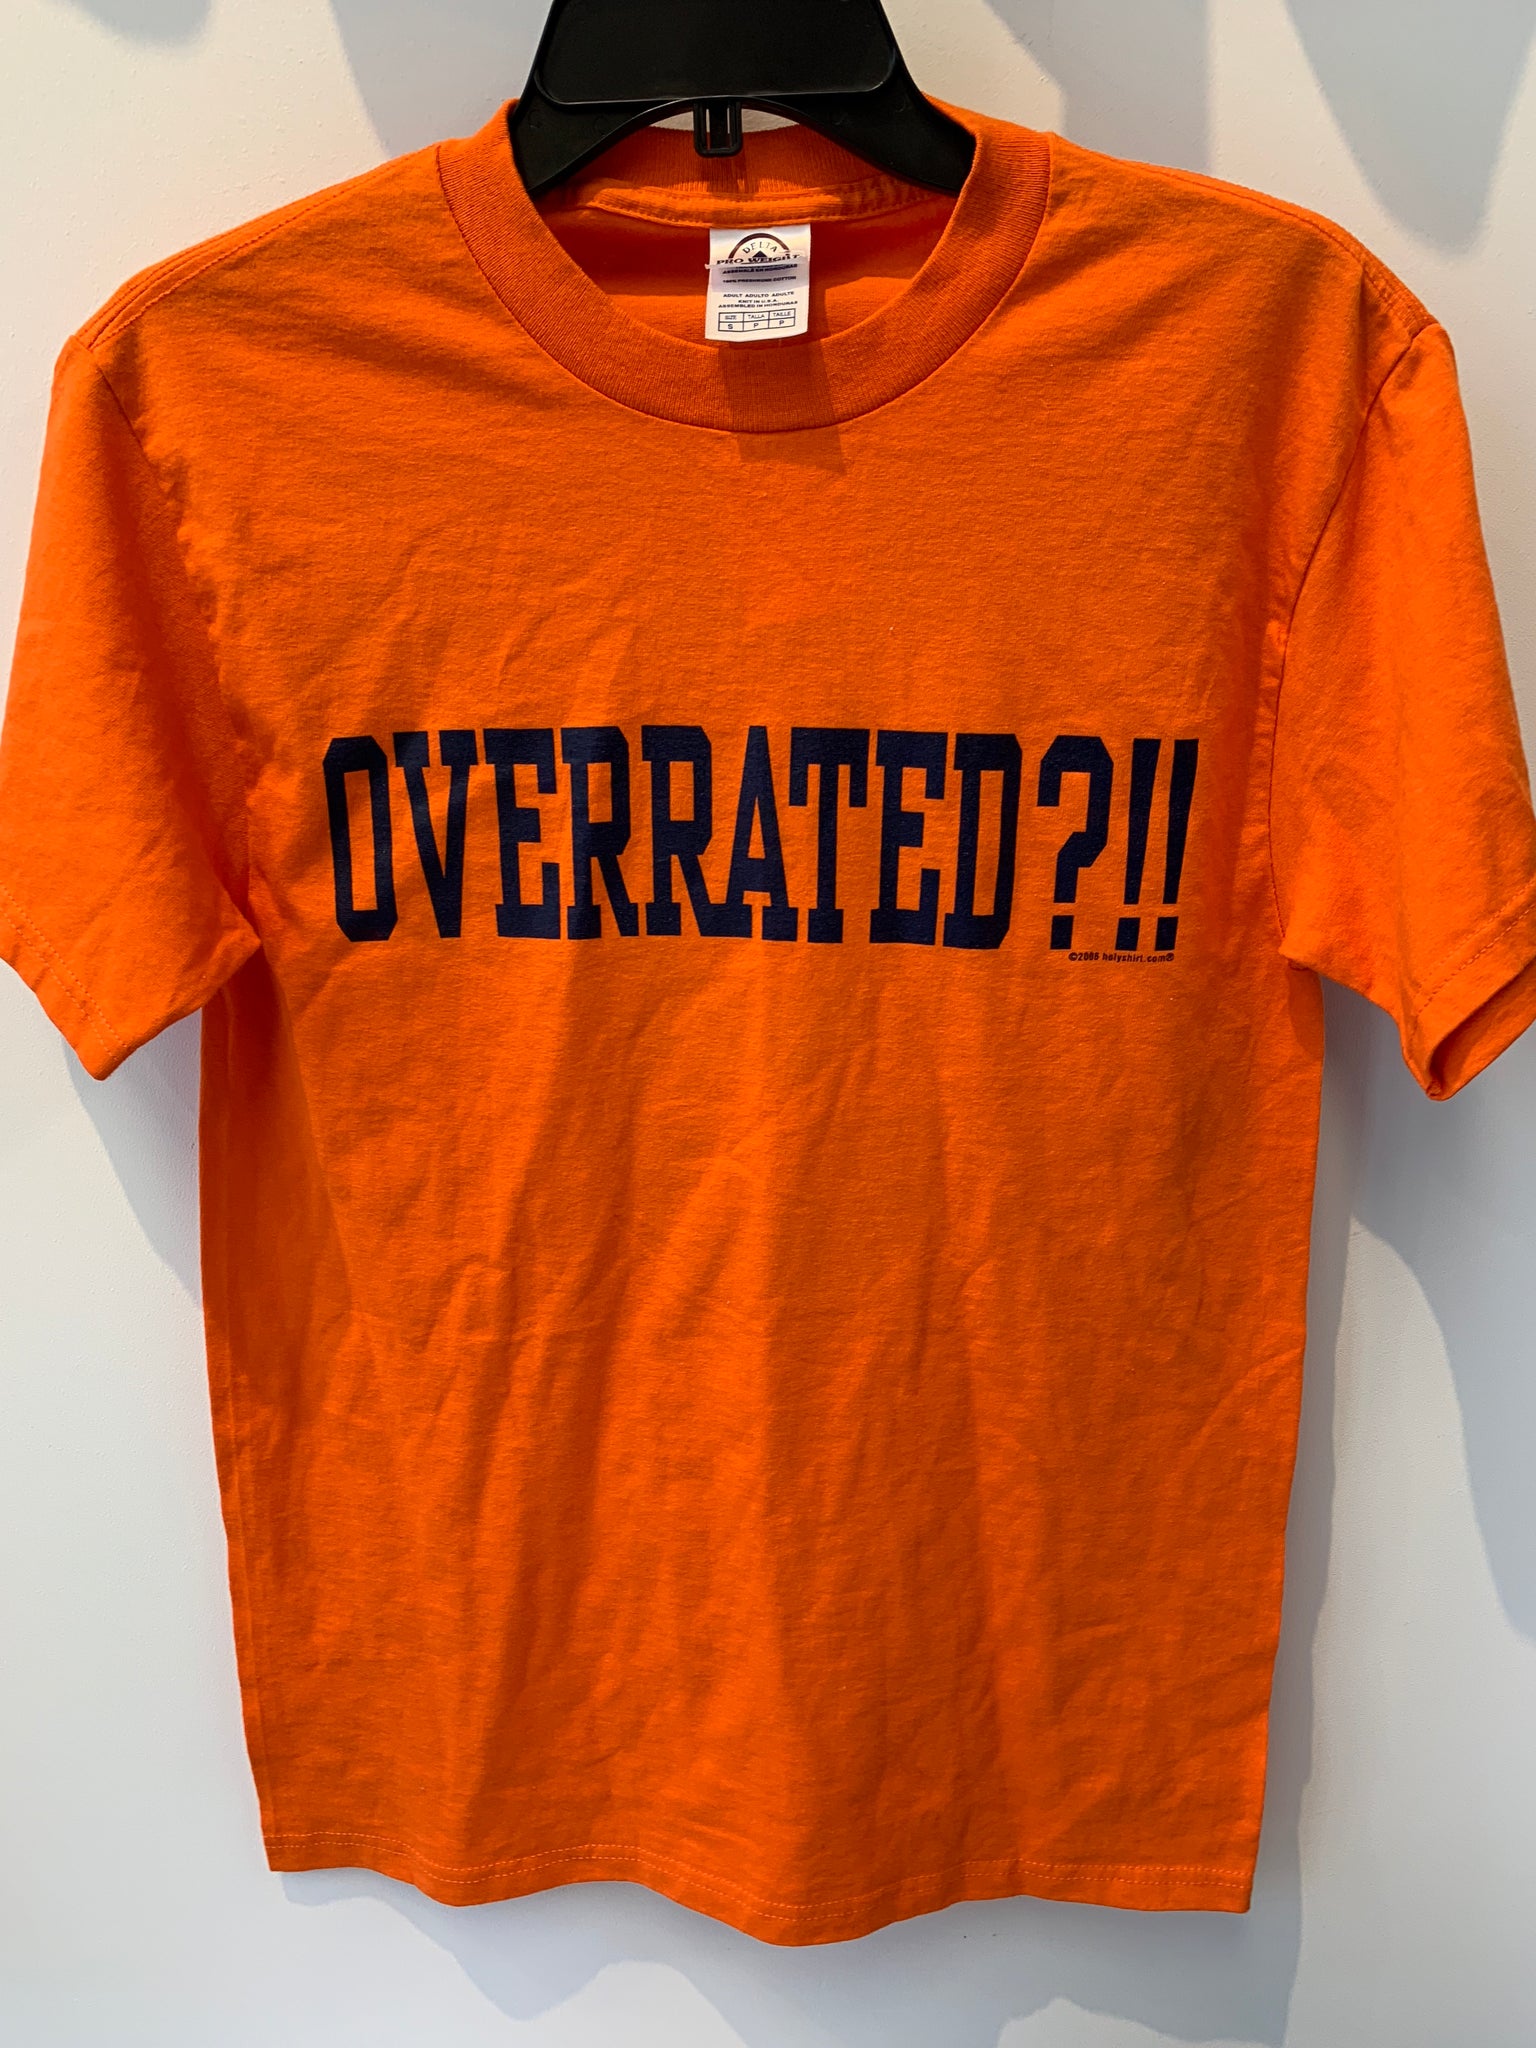 Overrated? Syracuse #3 T Shirt TS1